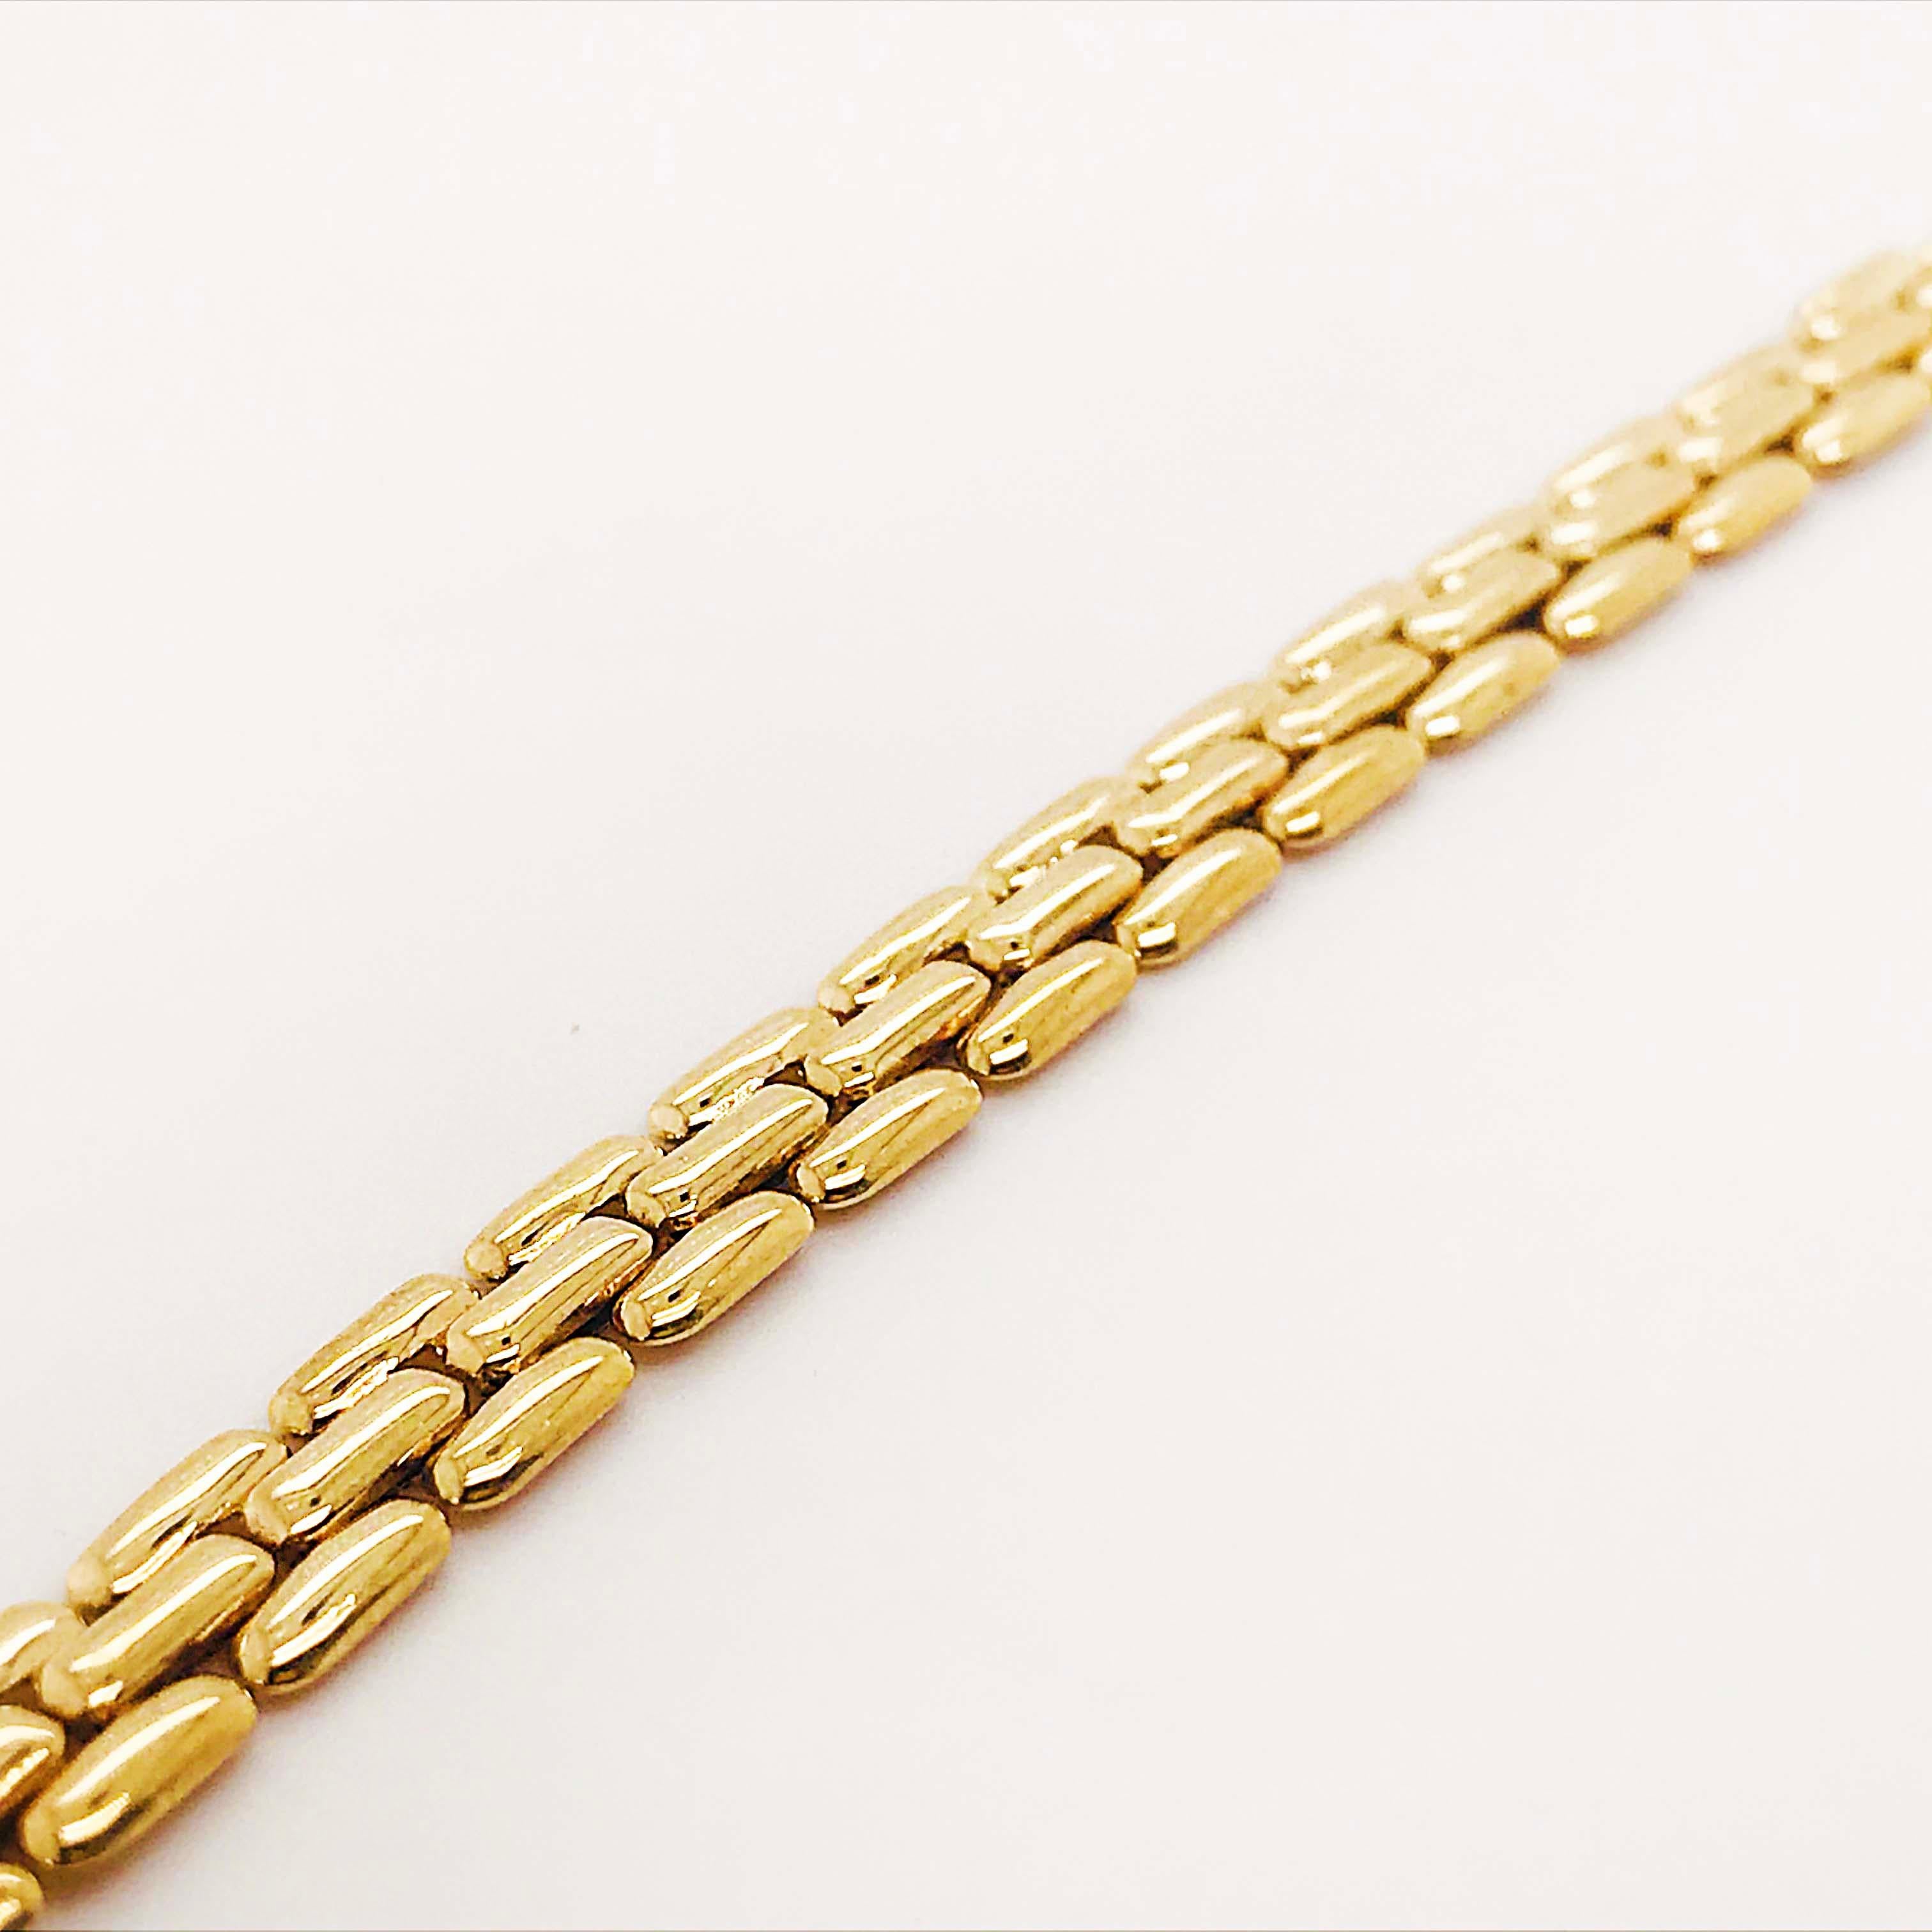 Gold Panther Chain Bracelet with Large Lobster Clasp, 14 Karat Yellow Gold 9